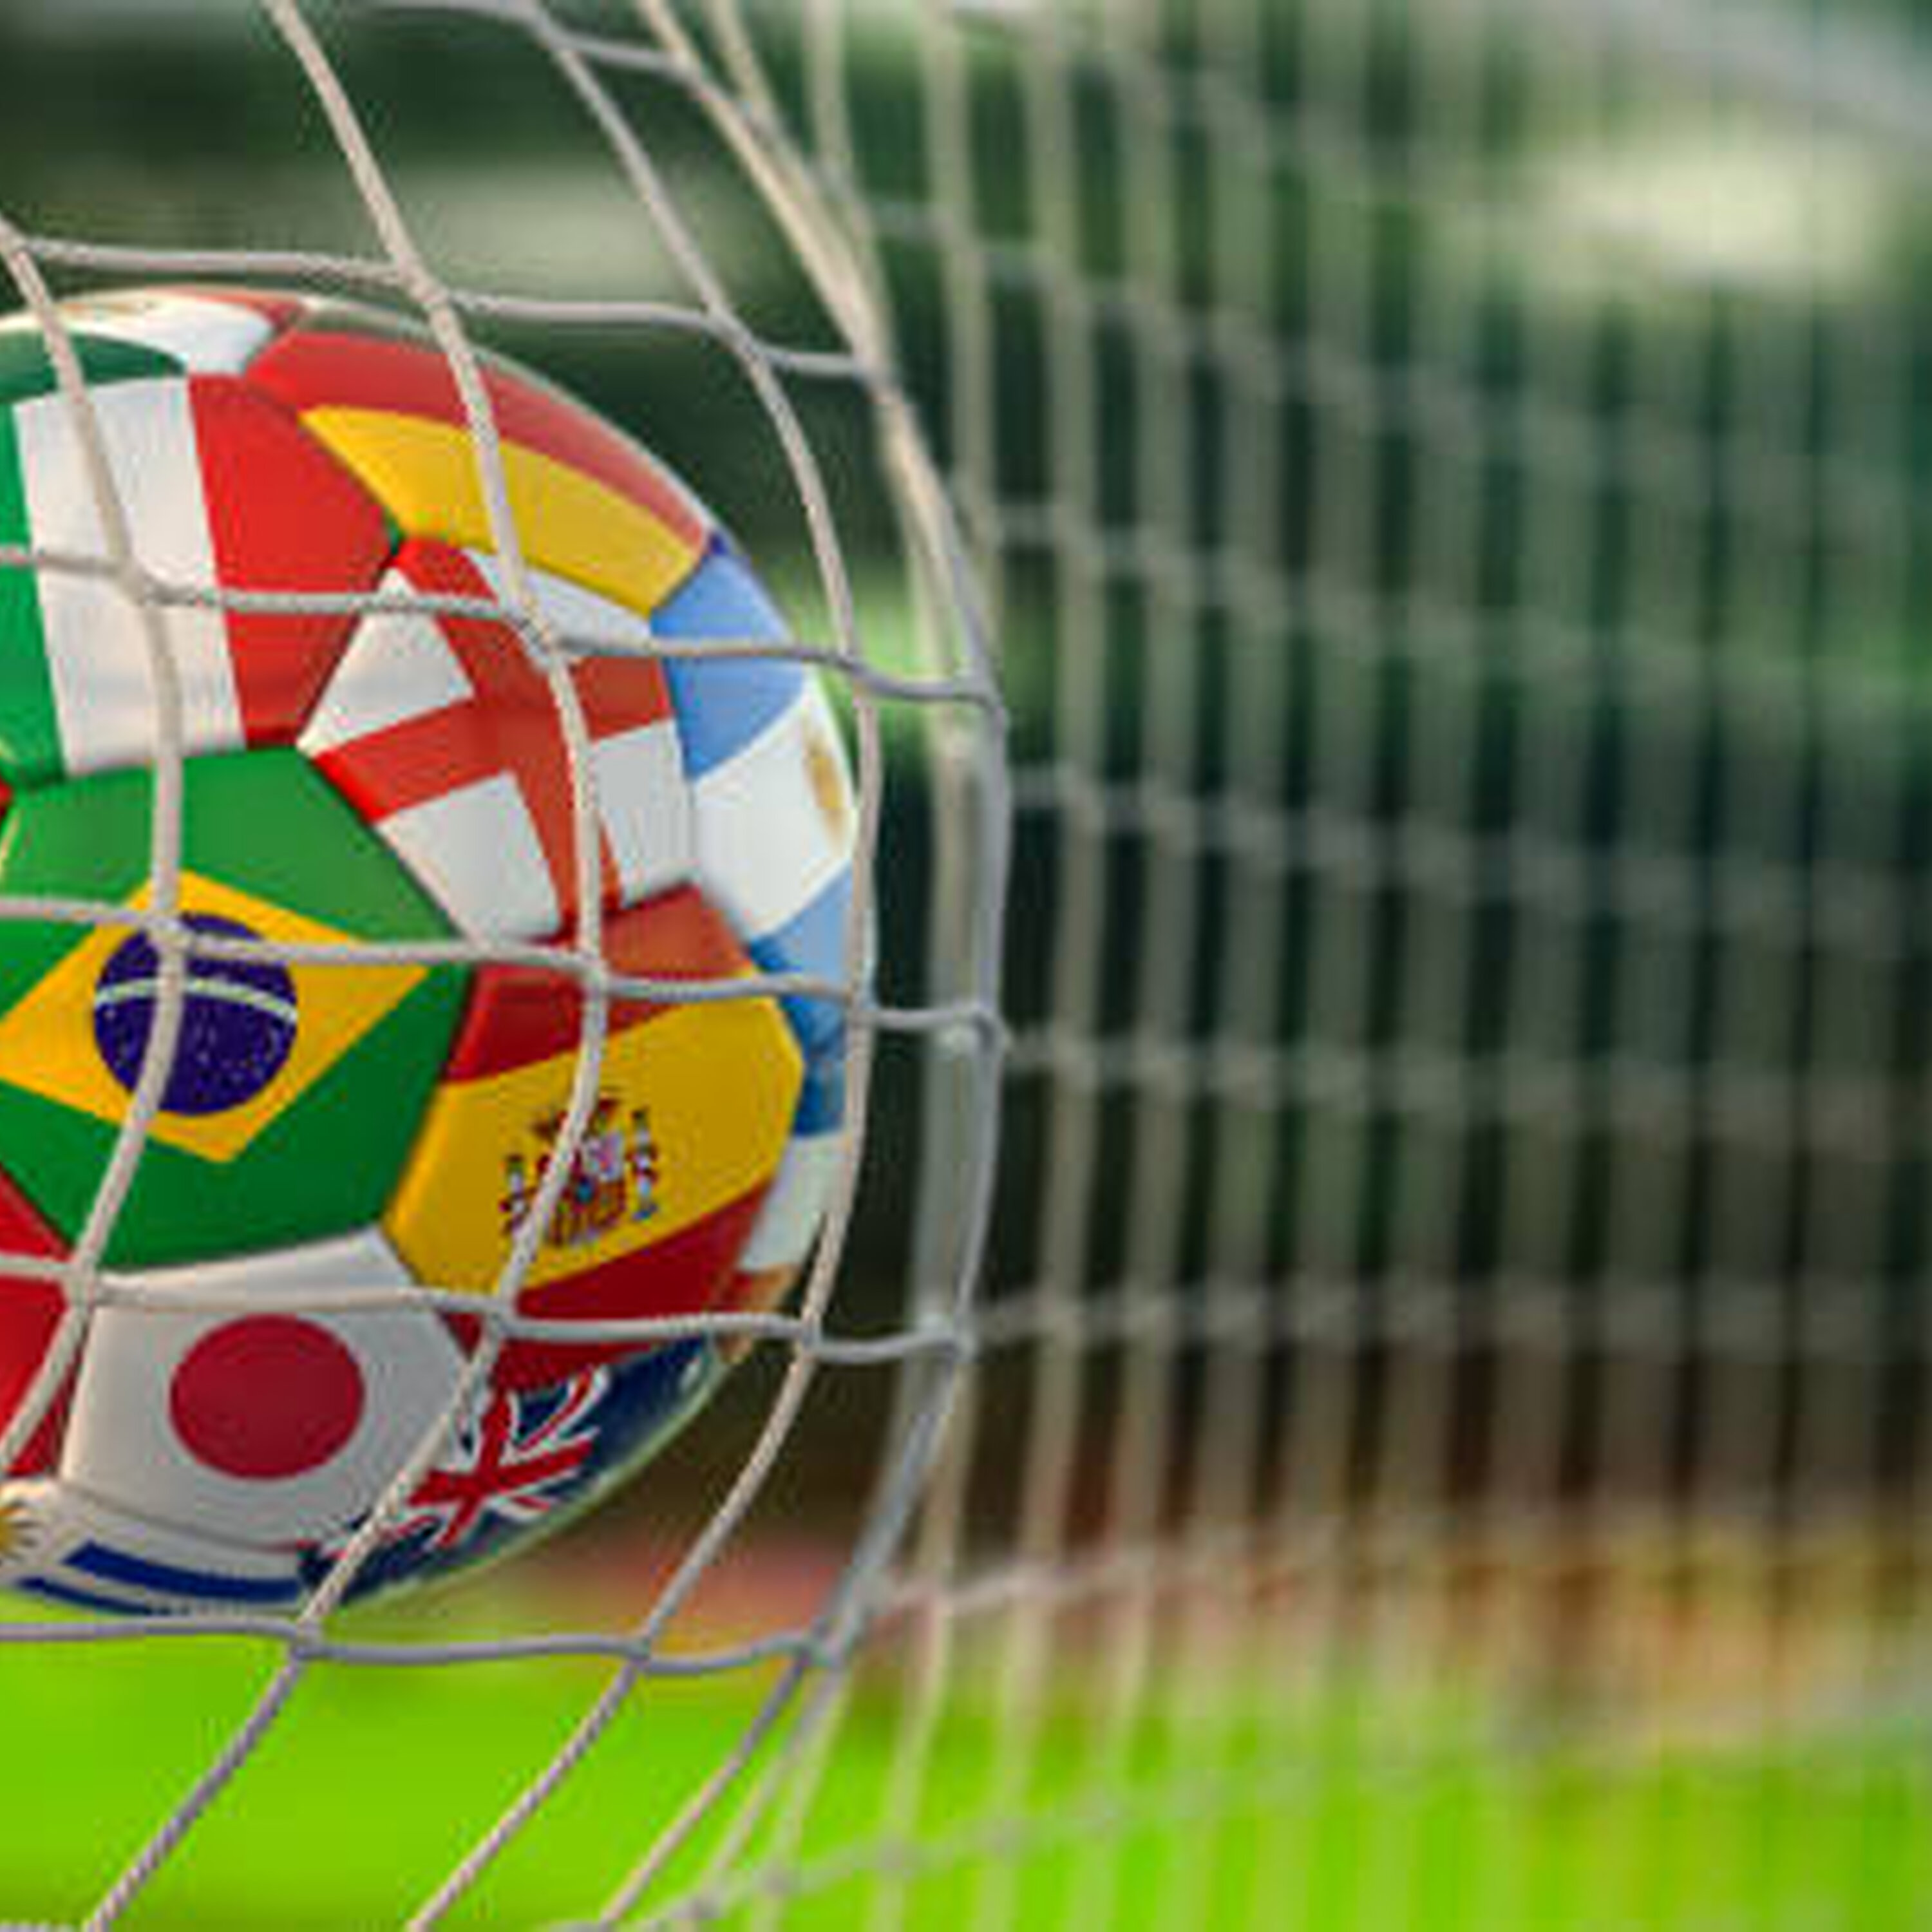 Looking ahead to Copa America and Euro 2024 soccer tournaments